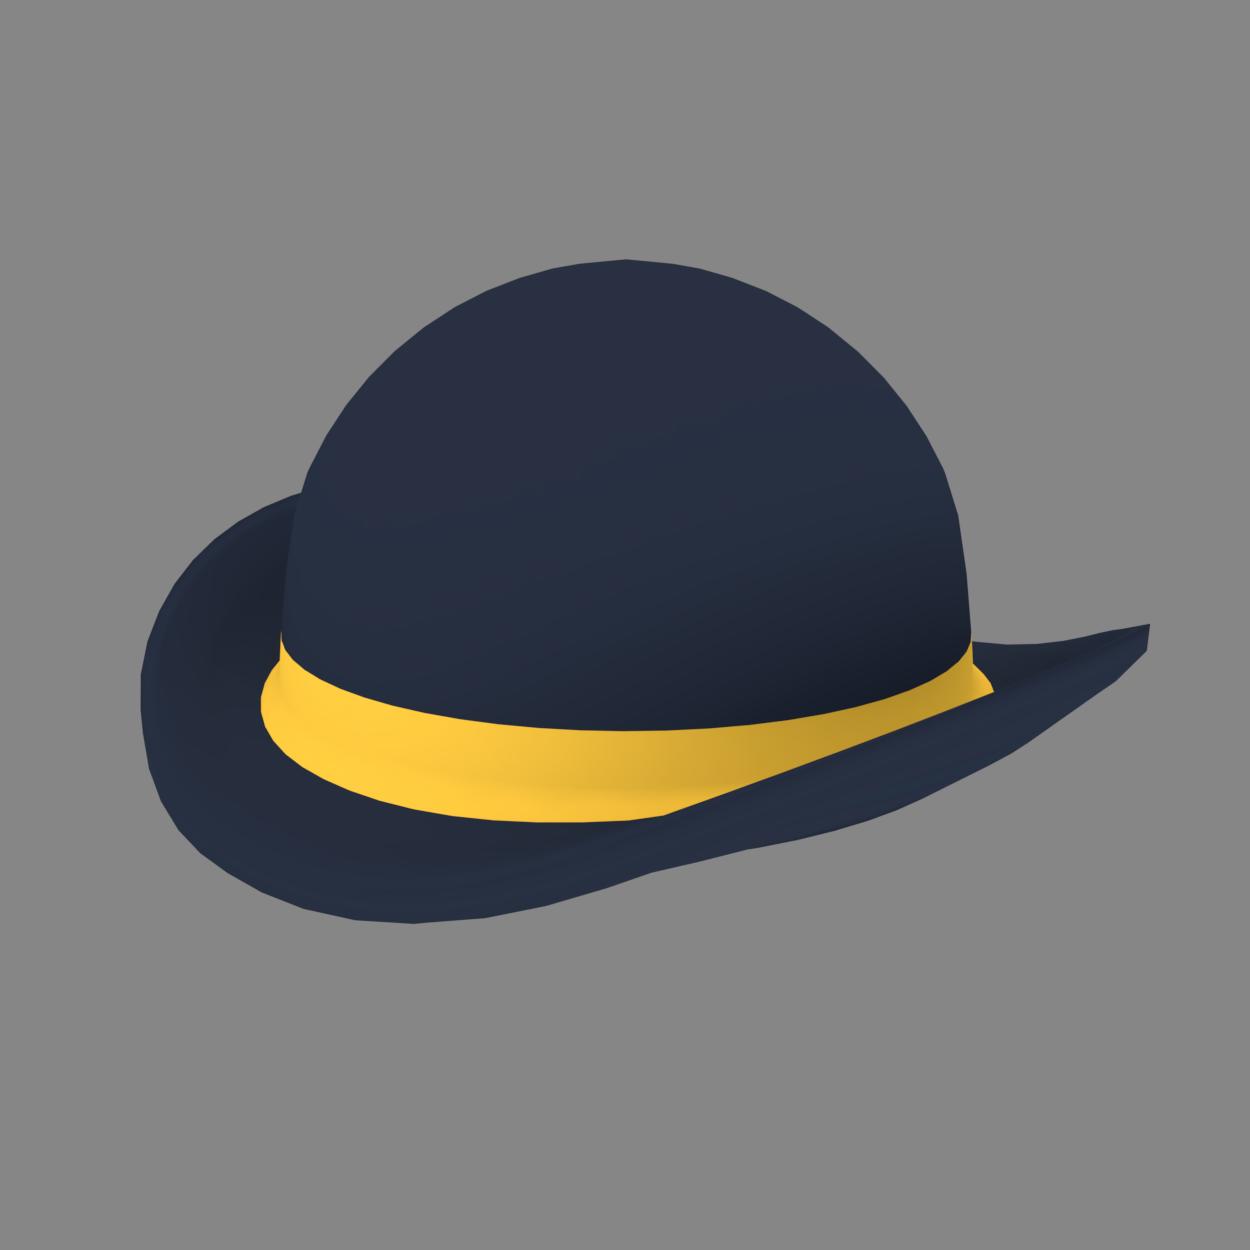 Mas On Twitter My Idea For A Hat Series In Roblox The Colored Banded Bowler Hat Series Will Include Blue Banded Bowler Red Banded Bowler Yellow Banded Bowler And White Banded Bowler - white red banned top hat roblox